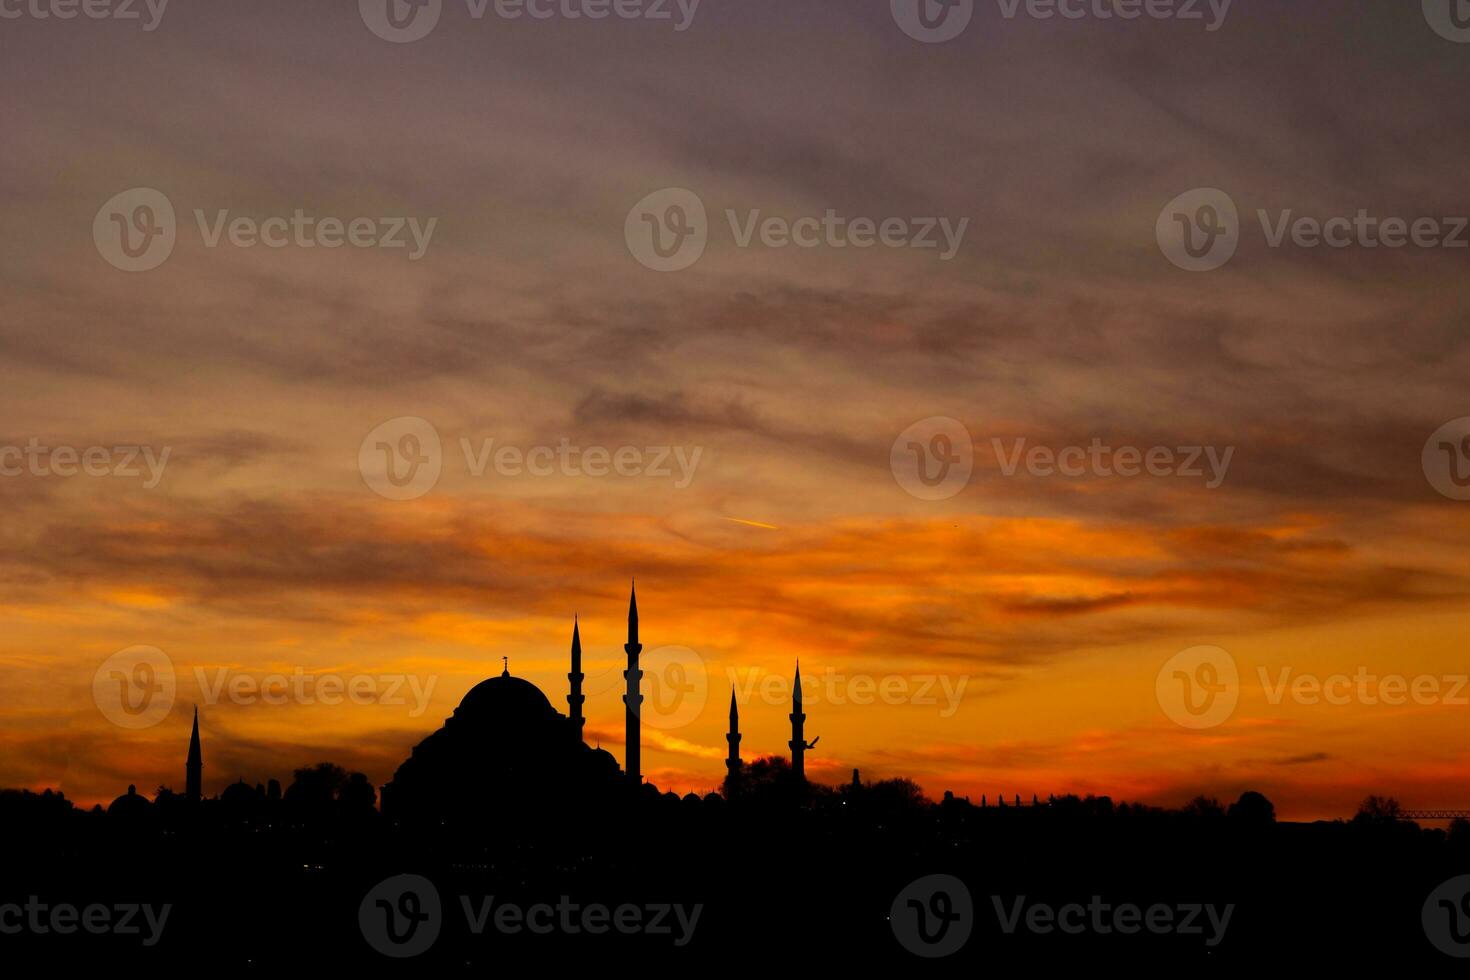 Istanbul silhouette. suleymaniye Mosque at sunset with dramatic clouds. photo